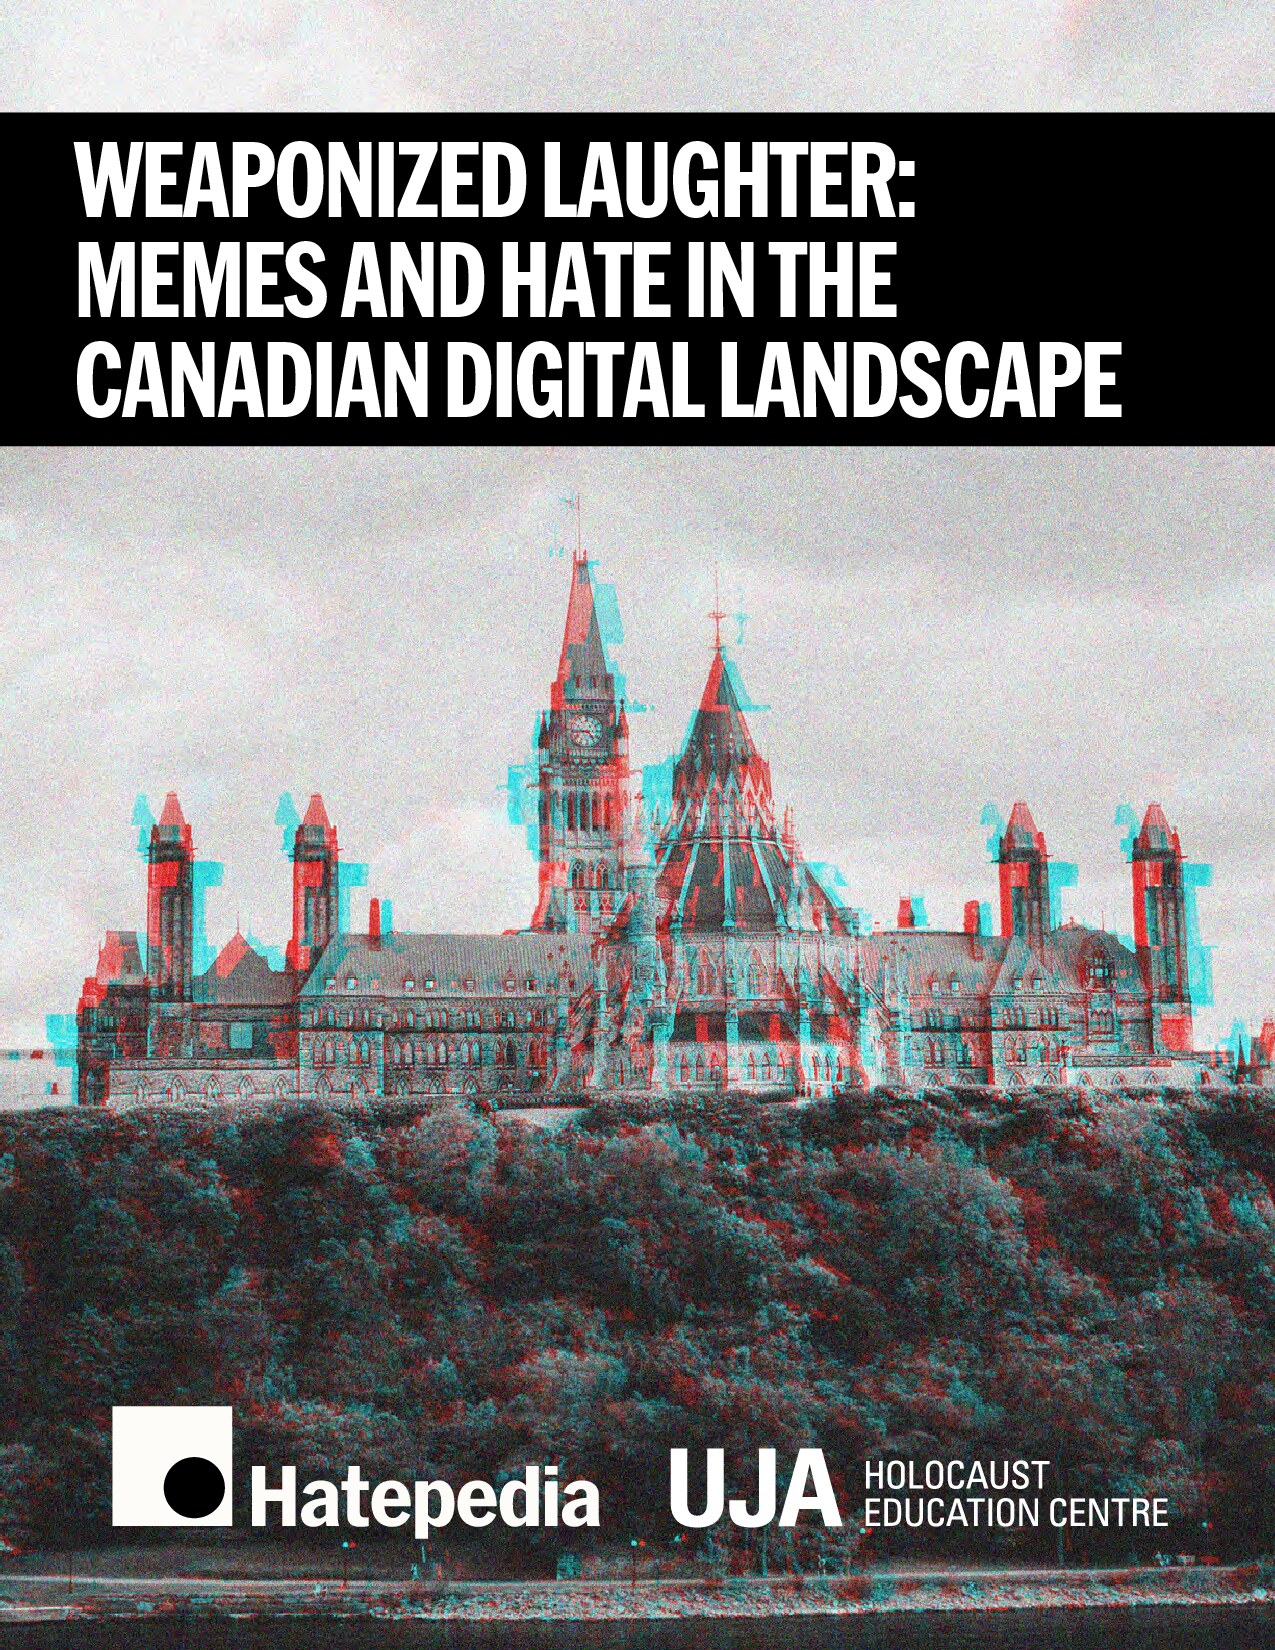 Weponized Laughter: Memes and Hate in the Canadian Digital Landscape